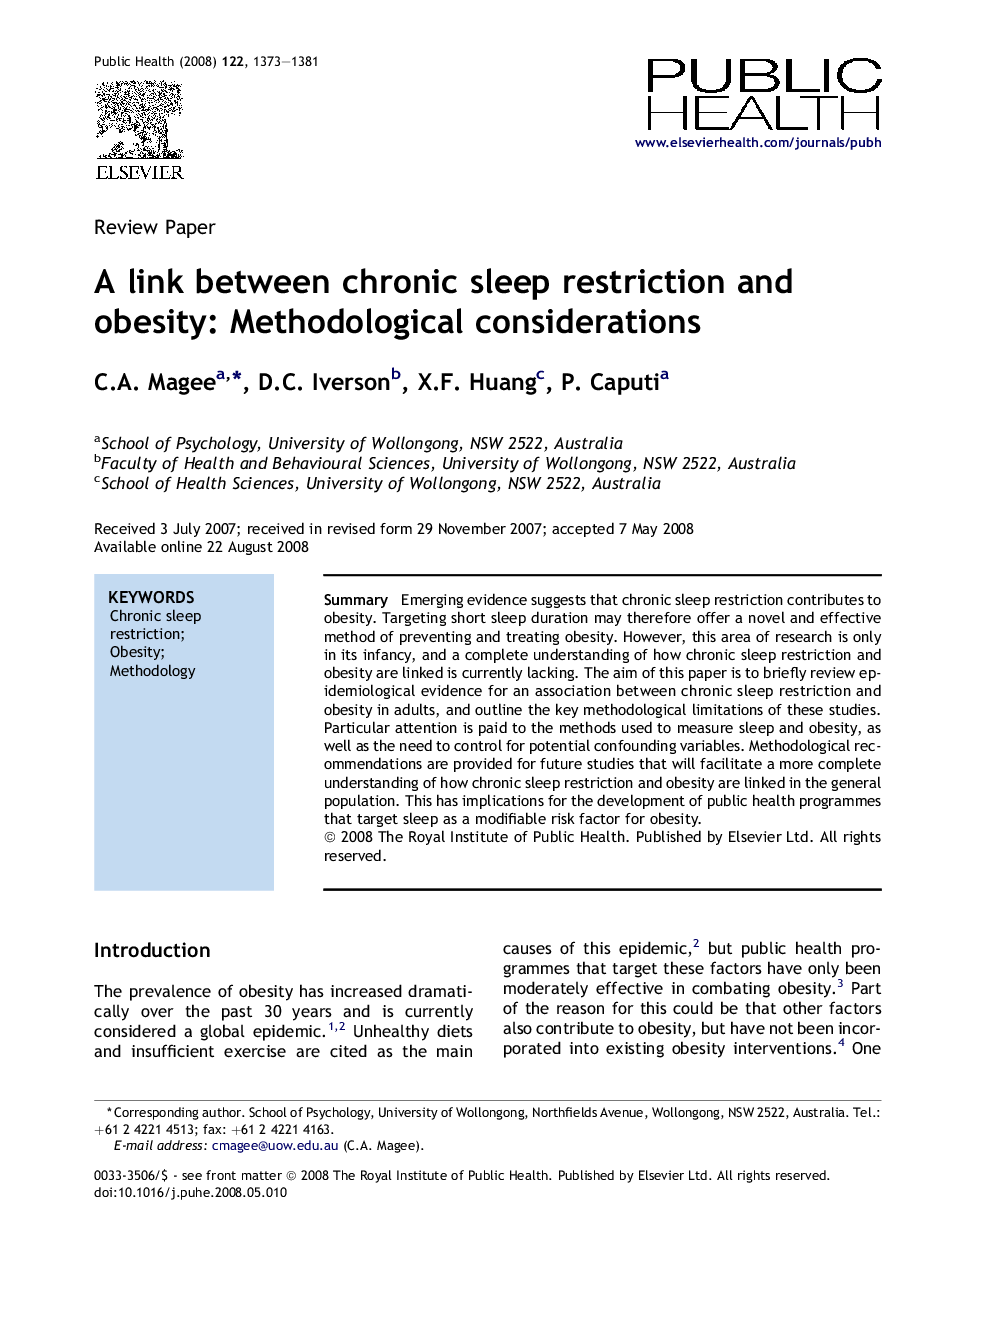 A link between chronic sleep restriction and obesity: Methodological considerations